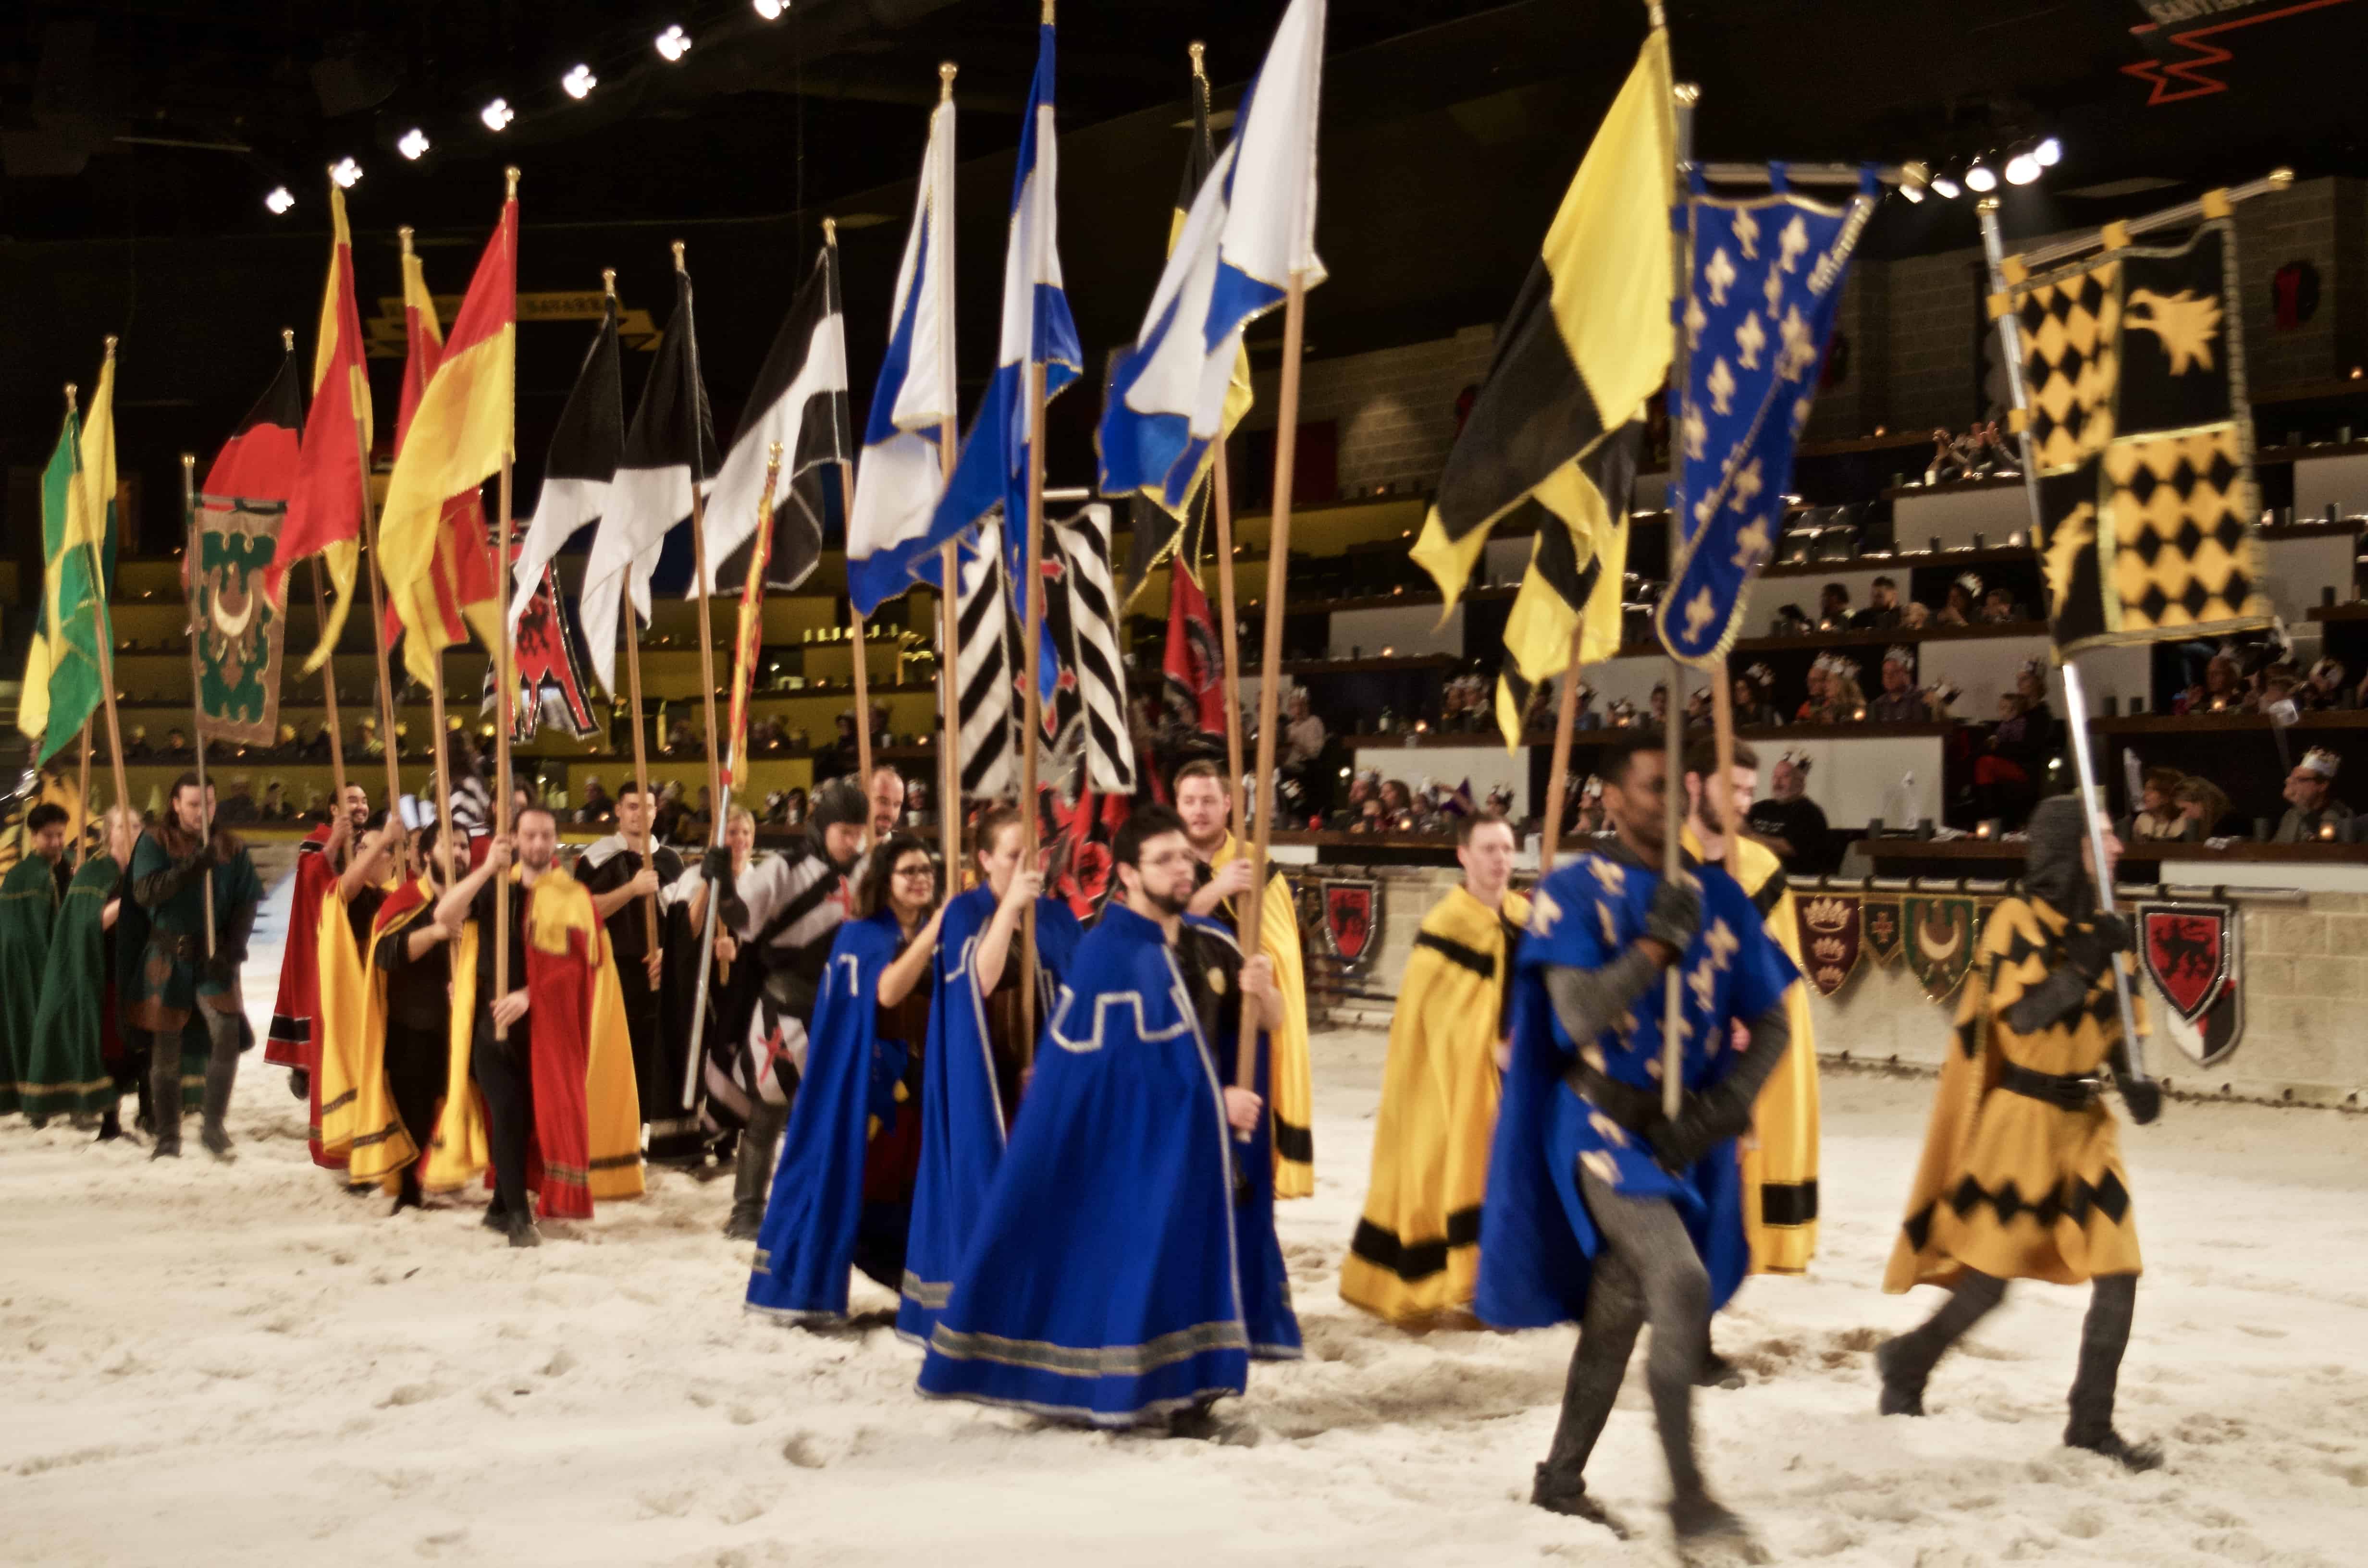 An Educational Field Trip to Medieval Times